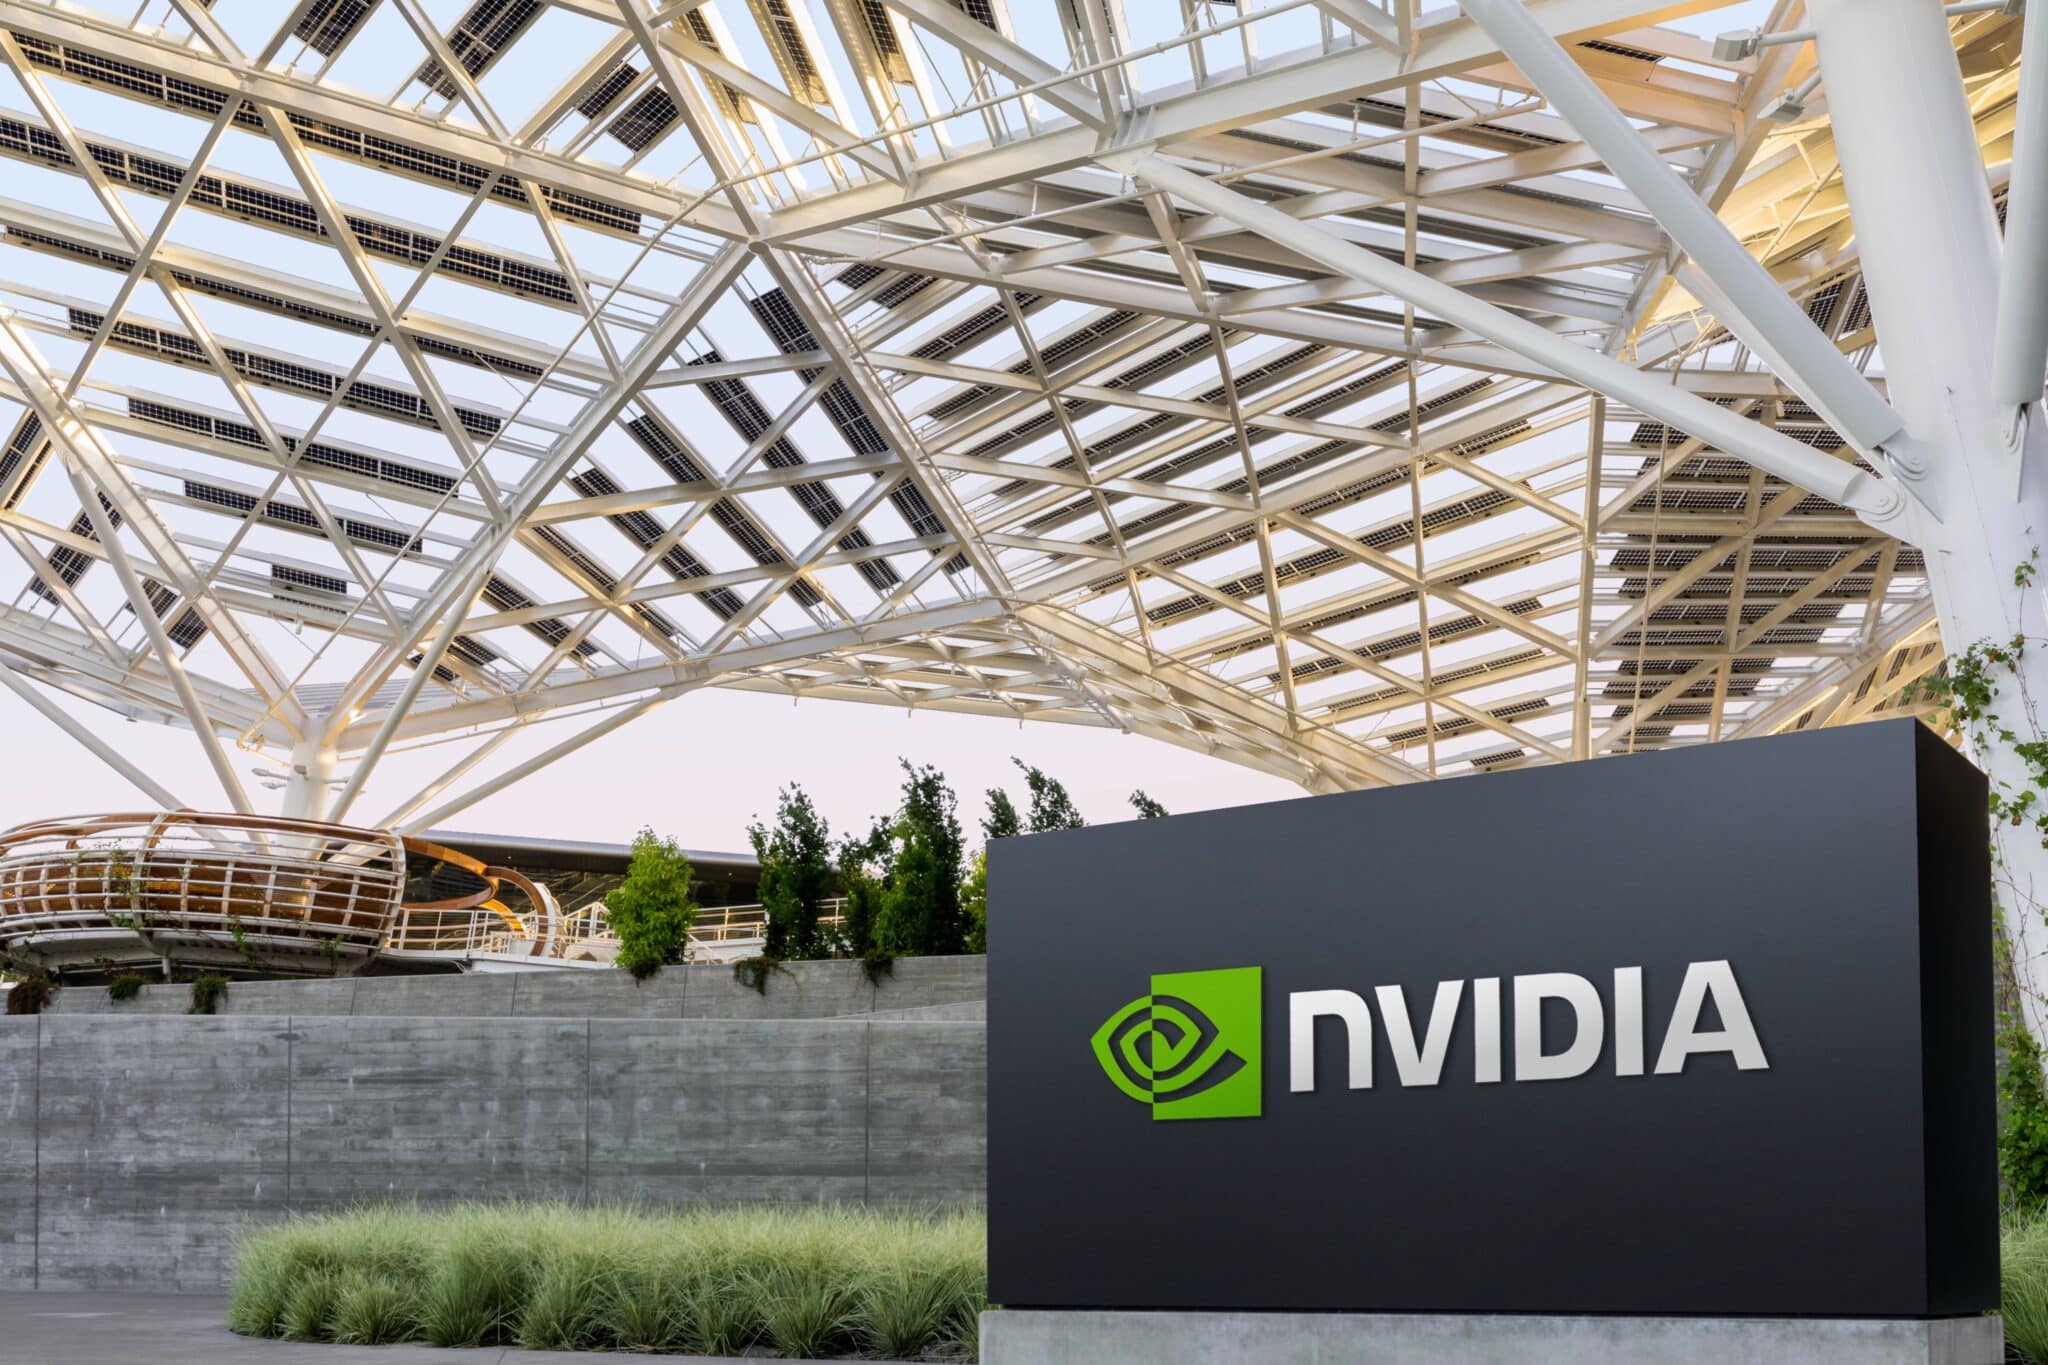 Nvidia,Corporation,Is,A,High-end,Gpu,And,Graphics,Card,Driver